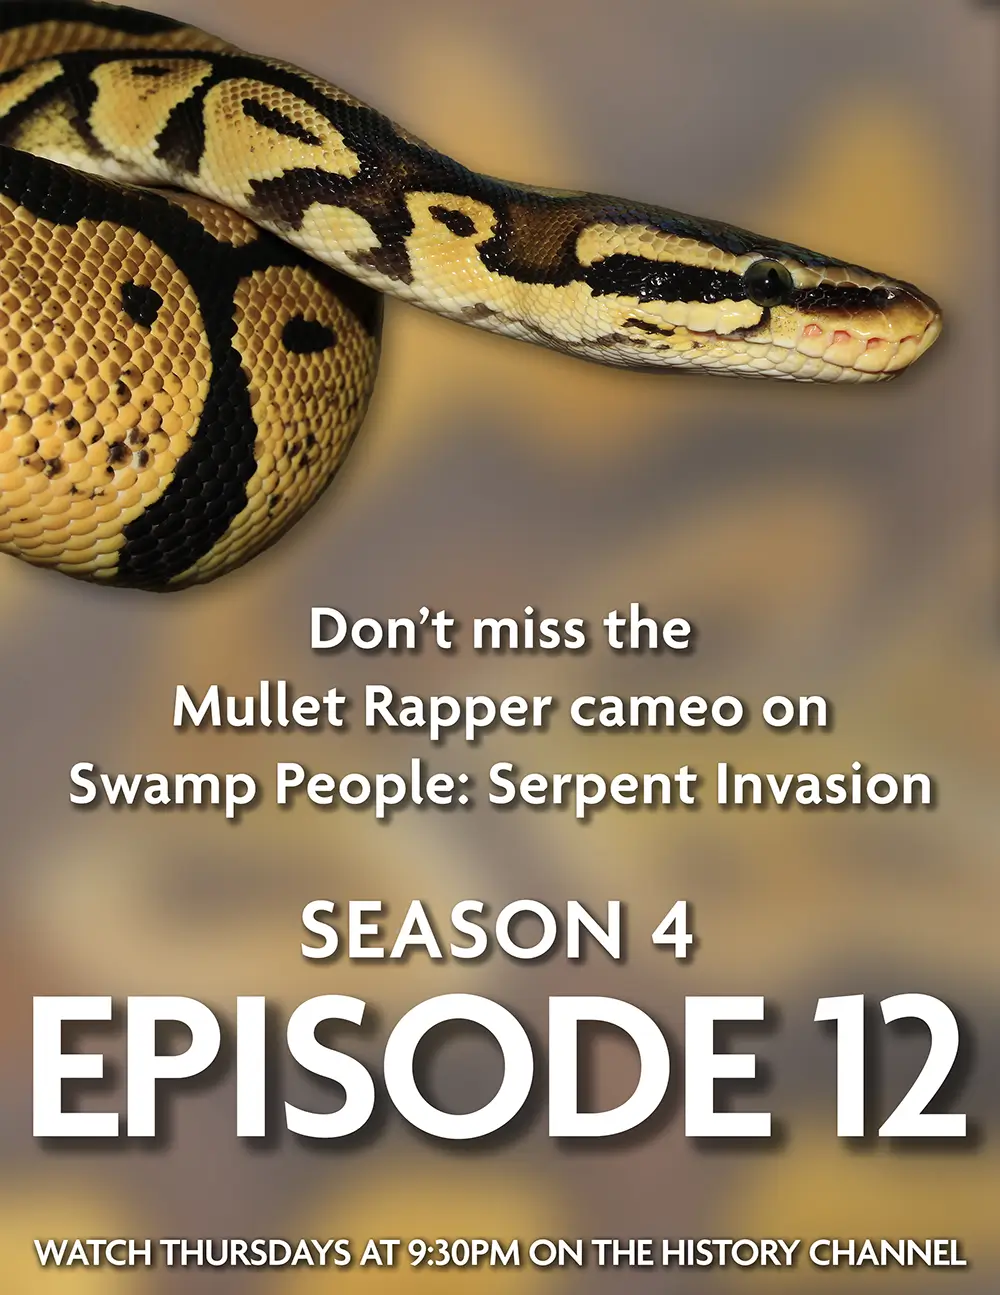 Don't miss the Mullet Rapper cameo on Swamp People Serpent Invasion